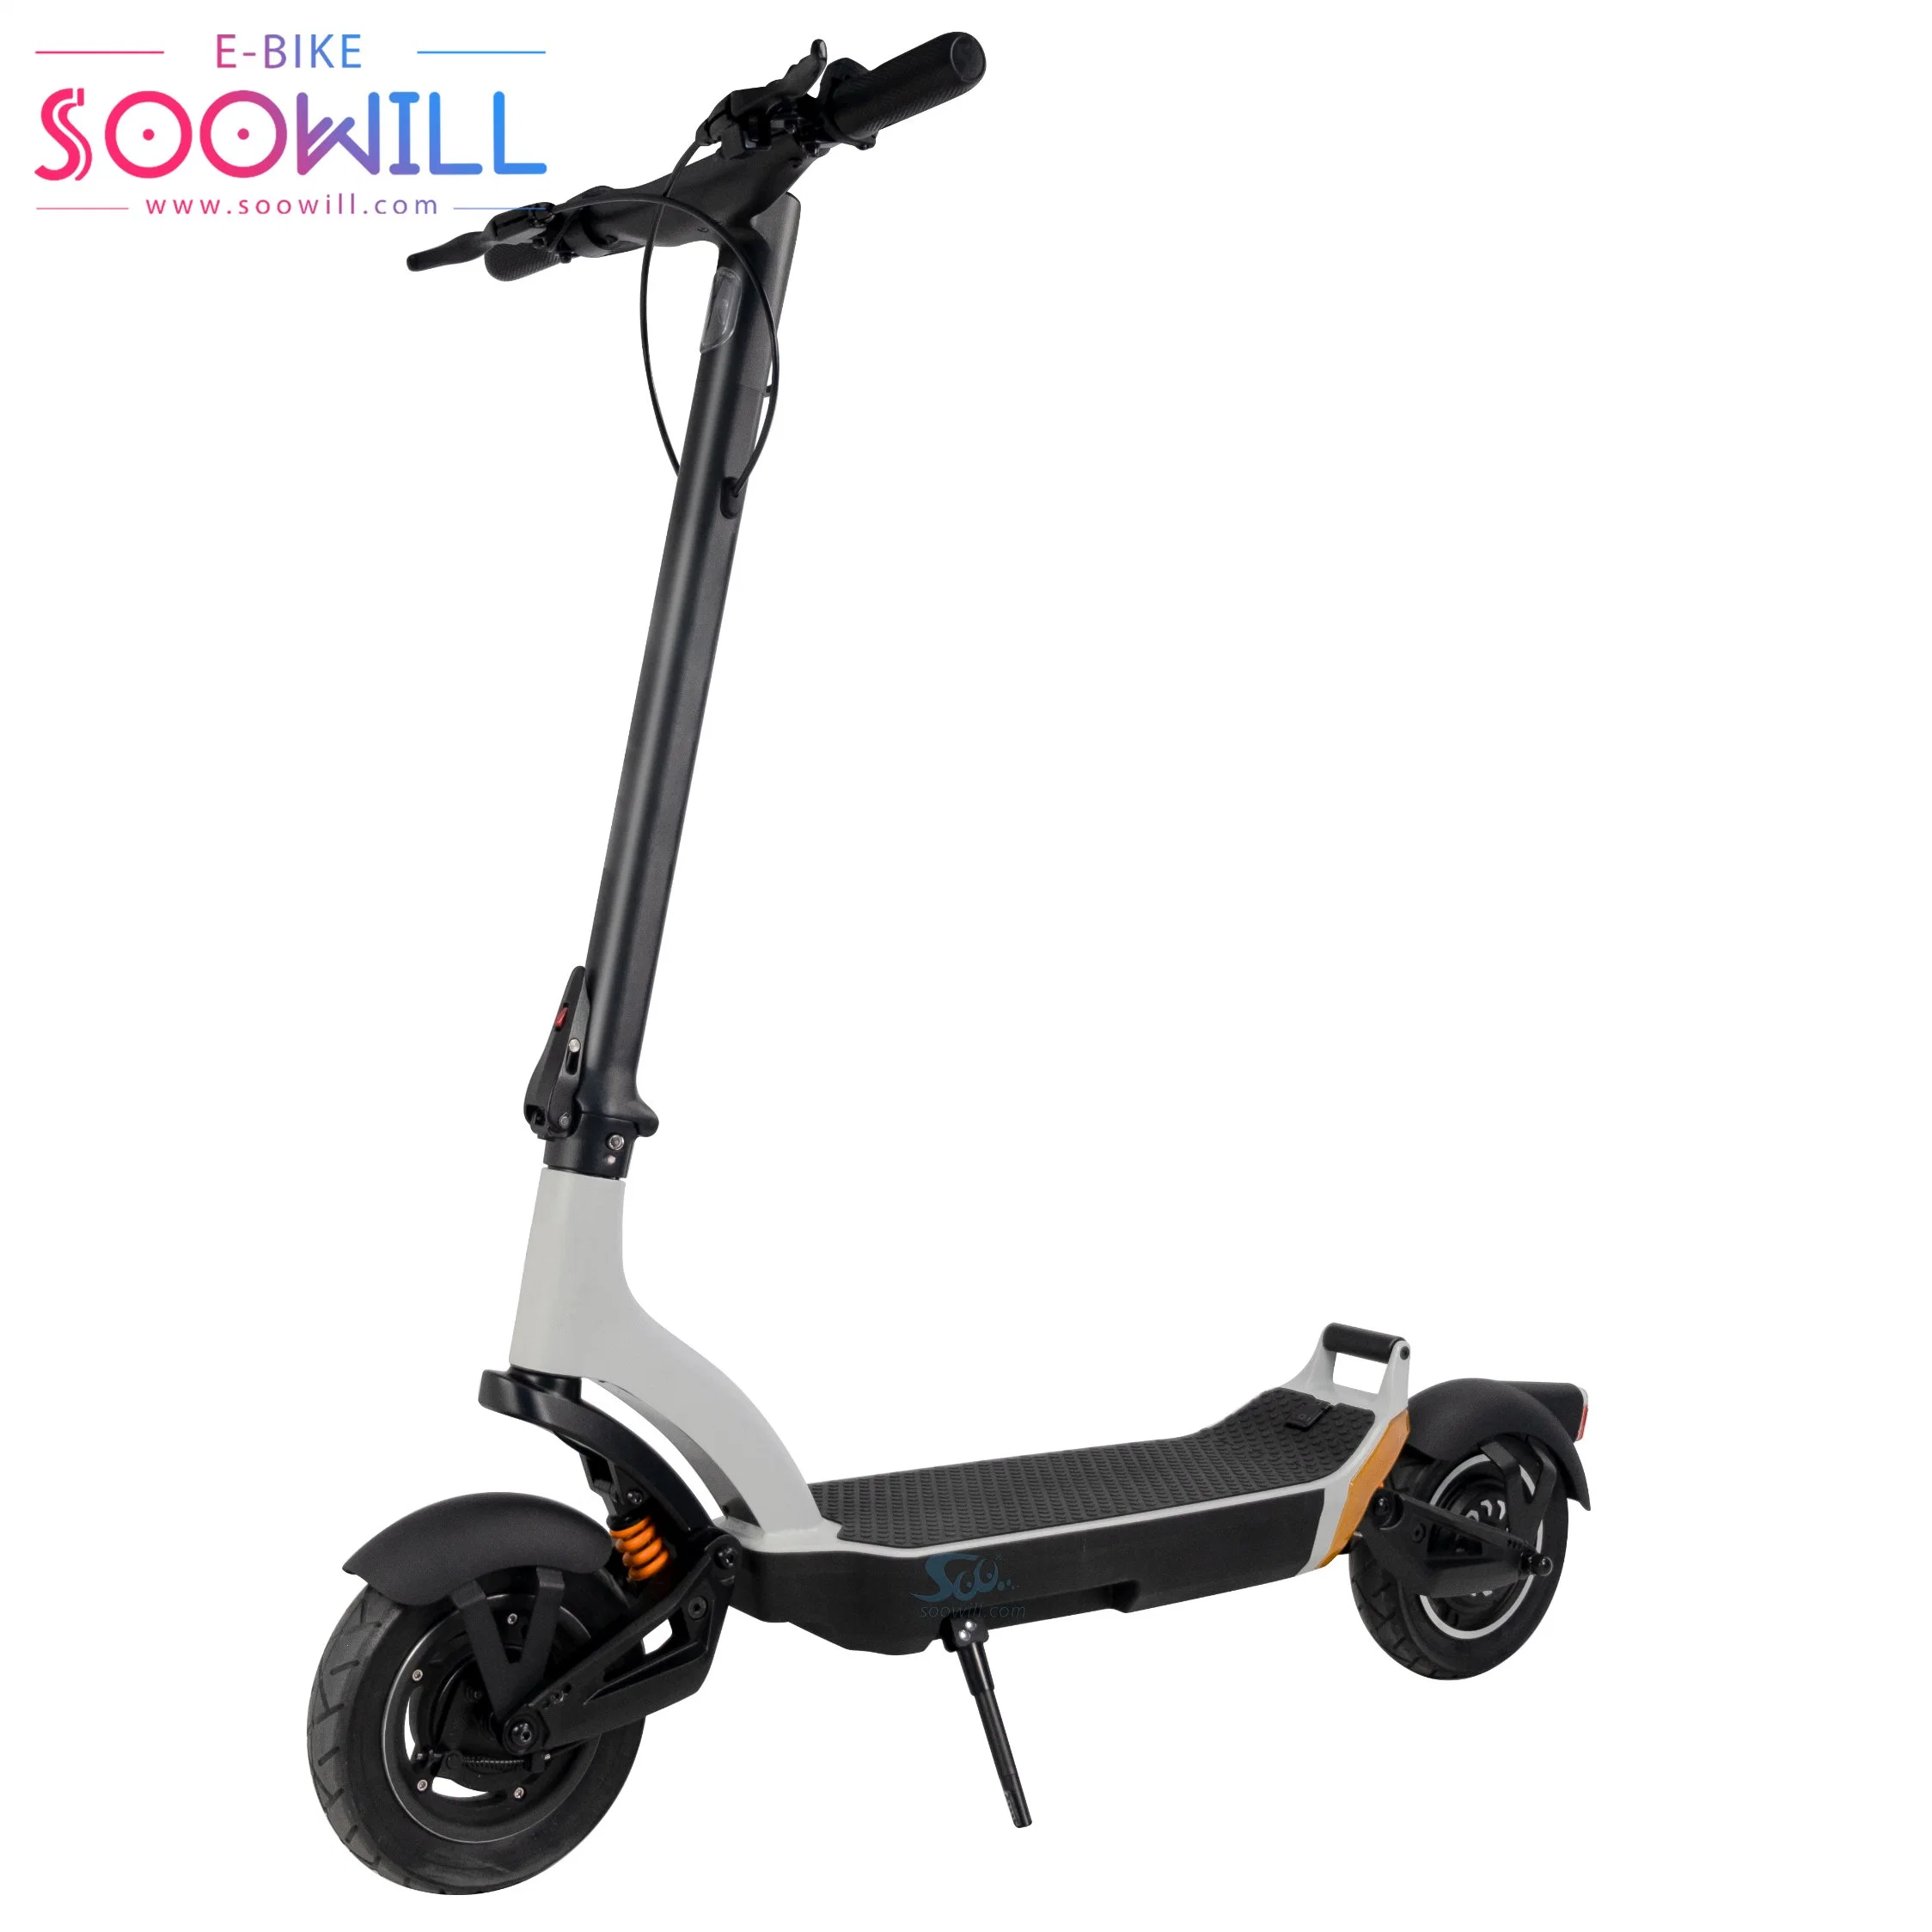 Kids Bikes for Adults Bike Swing Arm with Electric Motor 48V 13.5ah (Chinese Lithium Battery/4500mAh) Electric Scooter